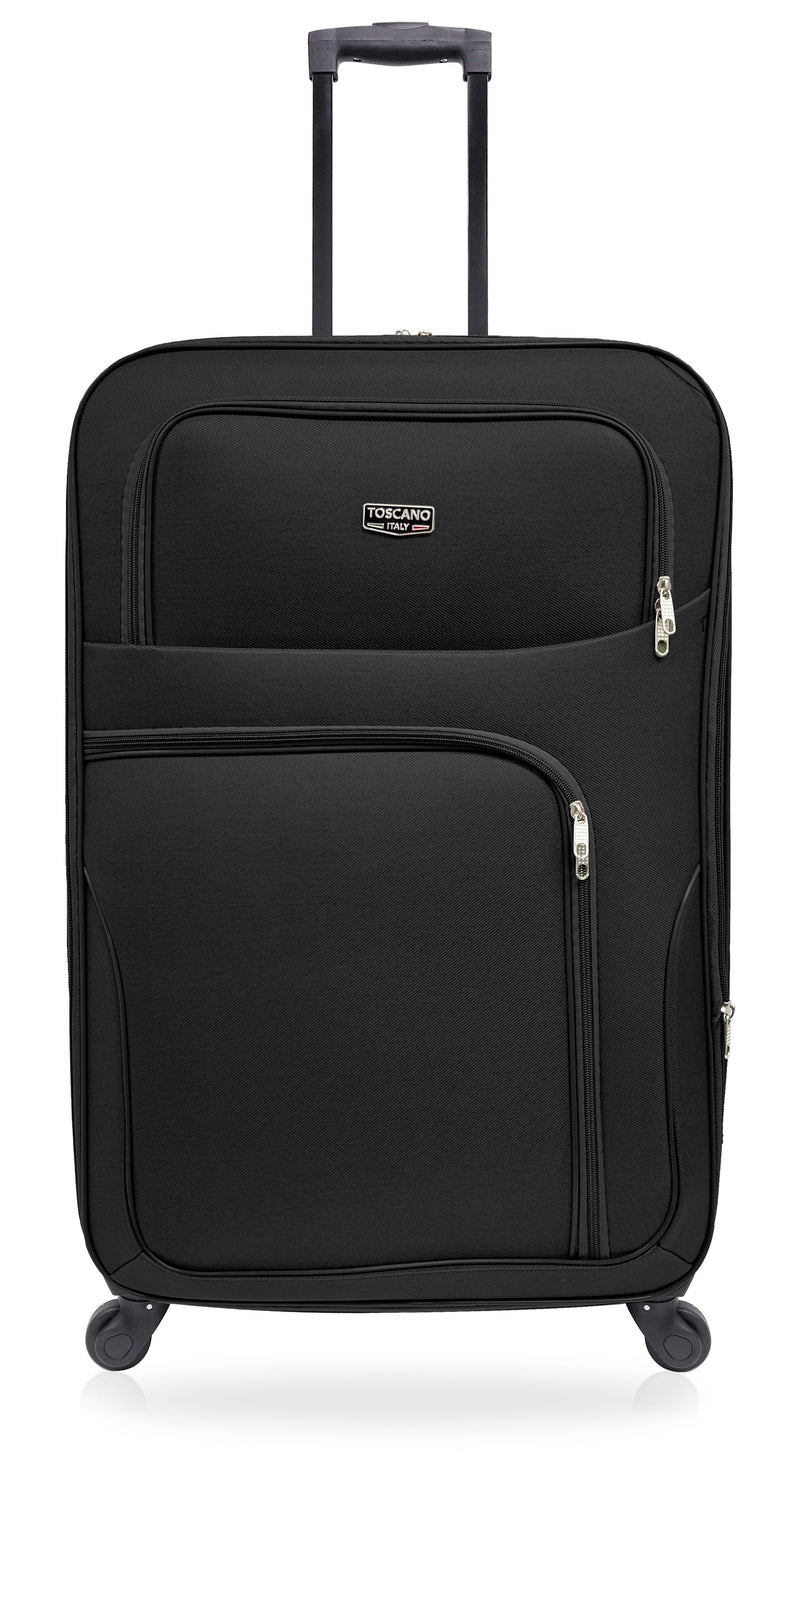 TOSCANO by Tucci 20-inch Allacciare Carry On Lightweight Luggage Suitcase